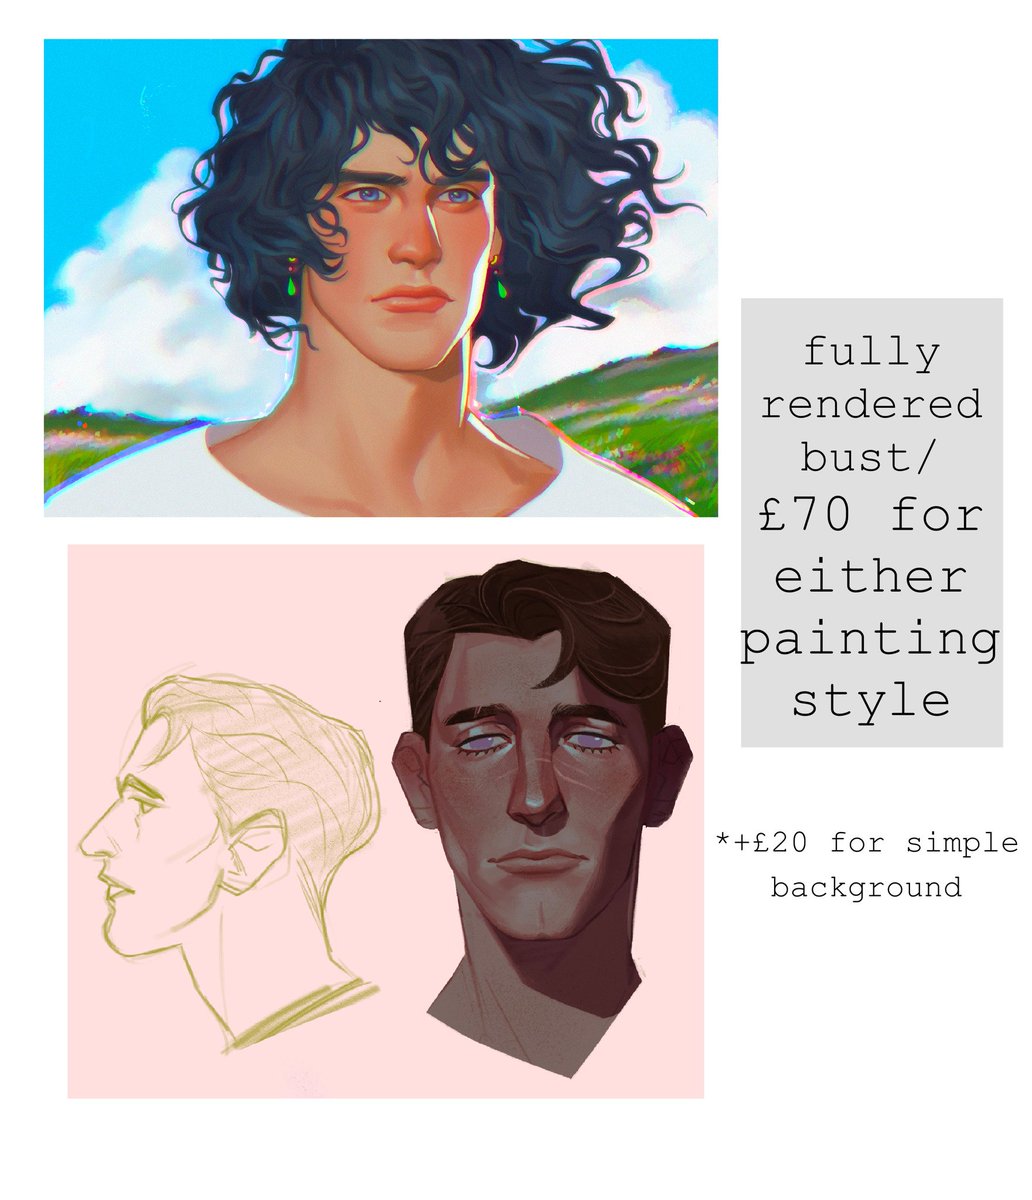 ‼️Hey guys my friend @panicfast is doing emergency commissions‼️Please  share  this  if  youre  not  able  to  commission  her.  More  commission  info  here https://t.co/EVLhxVKi5b 